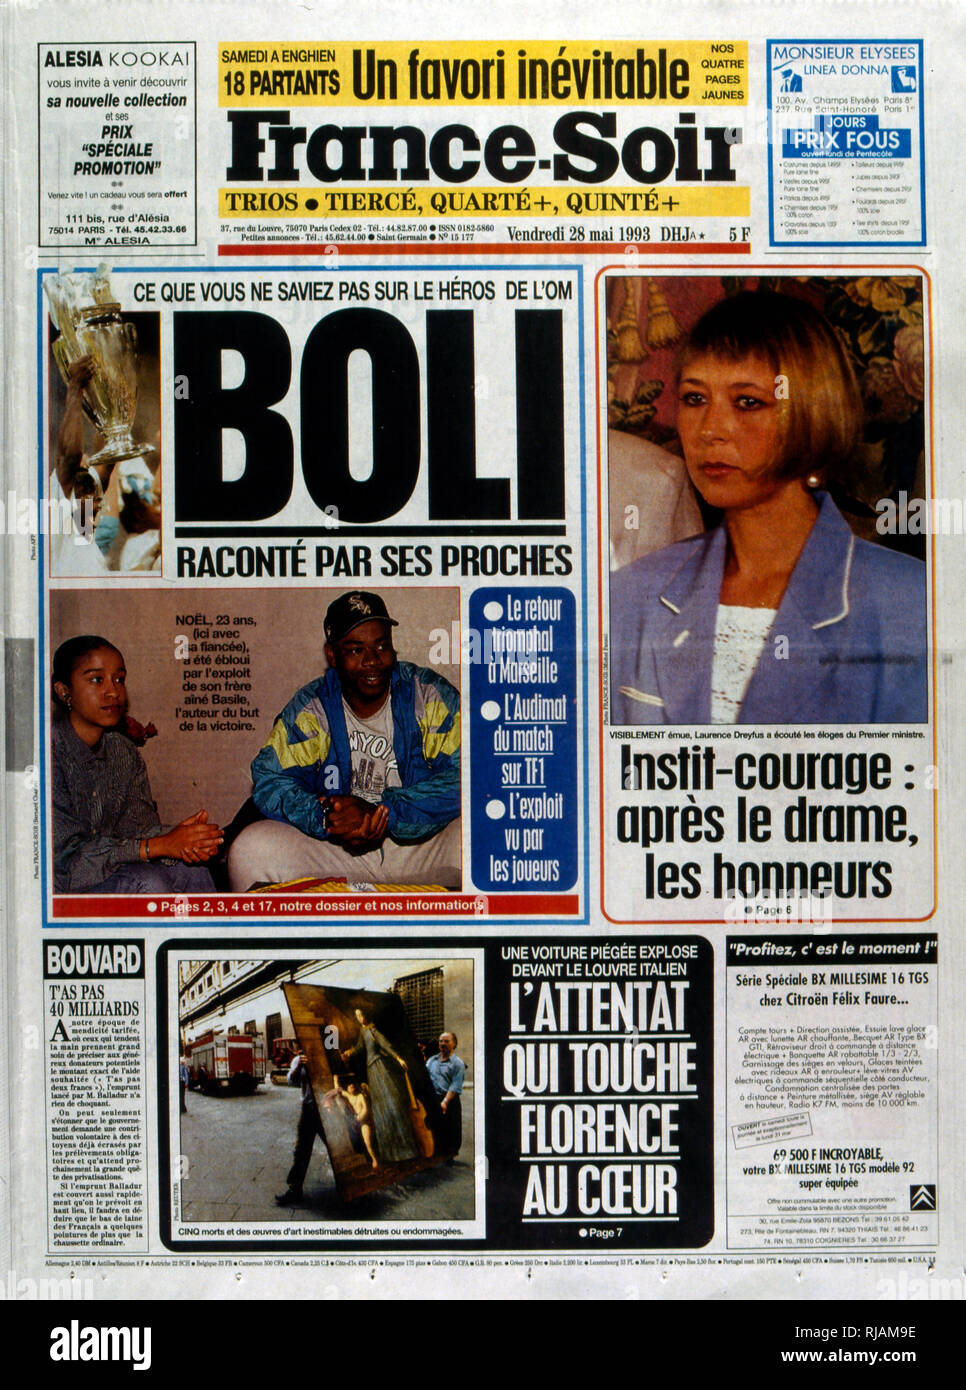 French publication 'France-Soir' reporting the Marseilles Football club winning the UEFA Champions League in 1993. The highlight of the Marseilles football club's history was winning the new format UEFA Champions League in 1993. Basile Boli scored the only goal against Italy's Milan in the final held in Munich's Olympic Stadium. This triumph, however, was followed by a decade of decline. In 1994, due to financial irregularities and a match fixing scandal involving then president Bernard Tapie Stock Photo